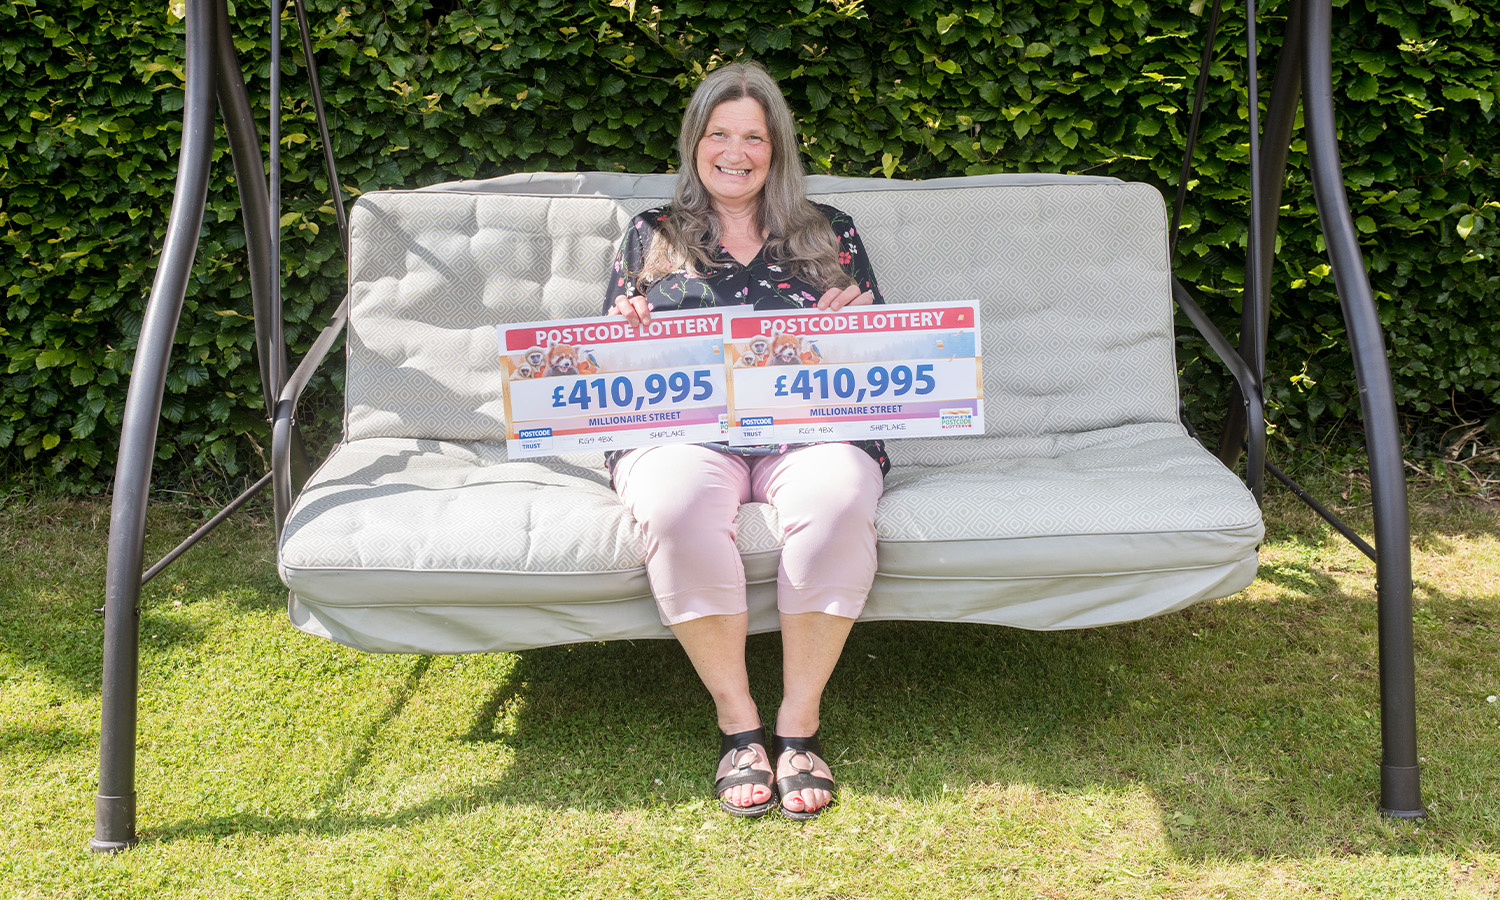 SWING WHEN YOU'RE WINNING: Sally celebrates prize in sun-kissed back garden